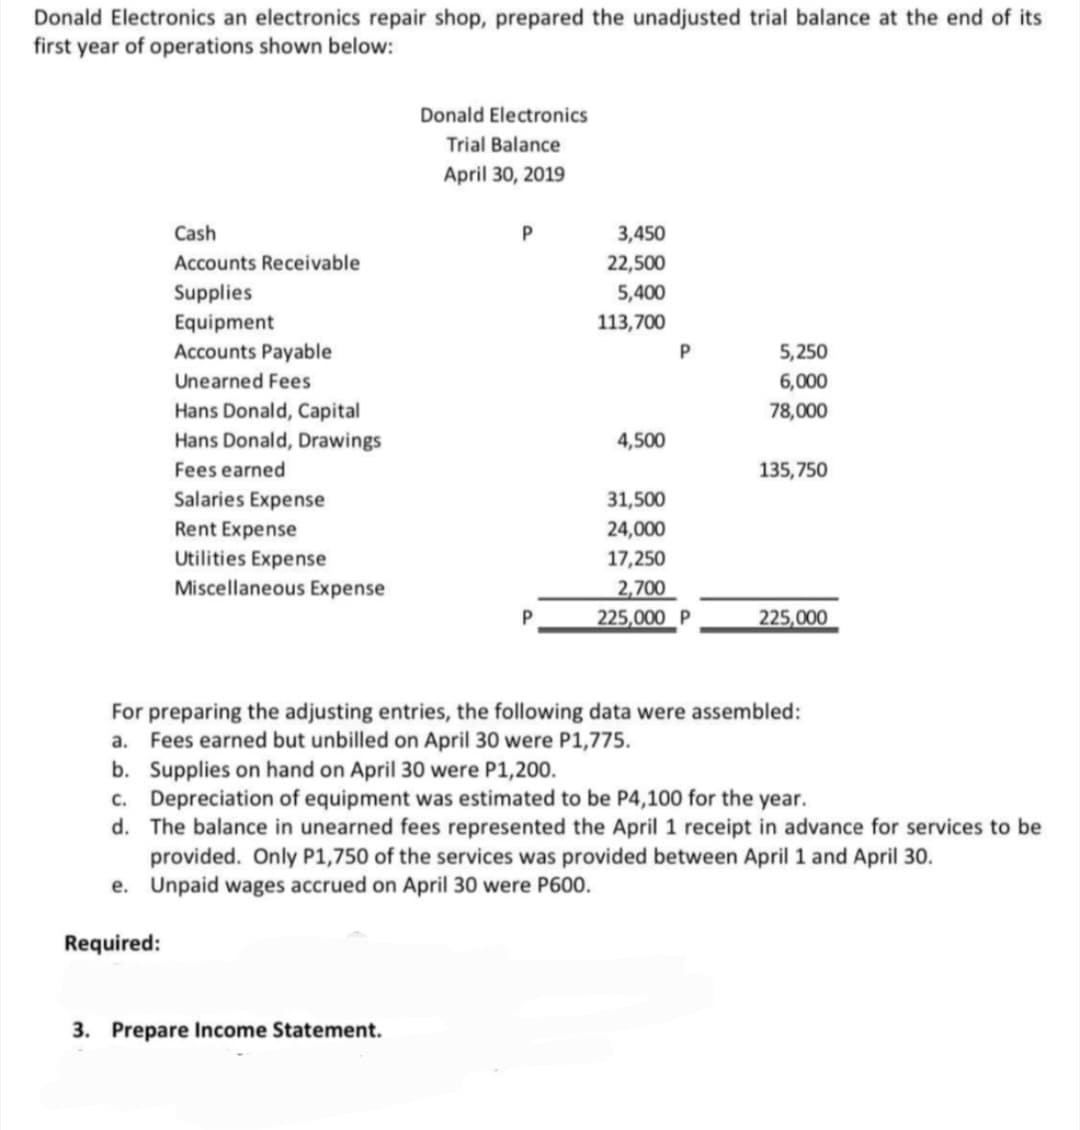 Donald Electronics an electronics repair shop, prepared the unadjusted trial balance at the end of its
first year of operations shown below:
Donald Electronics
Trial Balance
April 30, 2019
Cash
3,450
Accounts Receivable
22,500
Supplies
5,400
Equipment
113,700
Accounts Payable
5,250
Unearned Fees
6,000
Hans Donald, Capital
Hans Donald, Drawings
78,000
4,500
Fees earned
135, 750
Salaries Expense
31,500
Rent Expense
Utilities Expense
24,000
17,250
Miscellaneous Expense
2,700
225,000 P
225,000
For preparing the adjusting entries, the following data were assembled:
a. Fees earned but unbilled on April 30 were P1,775.
b. Supplies on hand on April 30 were P1,200.
c. Depreciation of equipment was estimated to be P4,100 for the year.
d. The balance in unearned fees represented the April 1 receipt in advance for services to be
provided. Only P1,750 of the services was provided between April 1 and April 30.
e. Unpaid wages accrued on April 30 were P600.
Required:
3. Prepare Income Statement.
